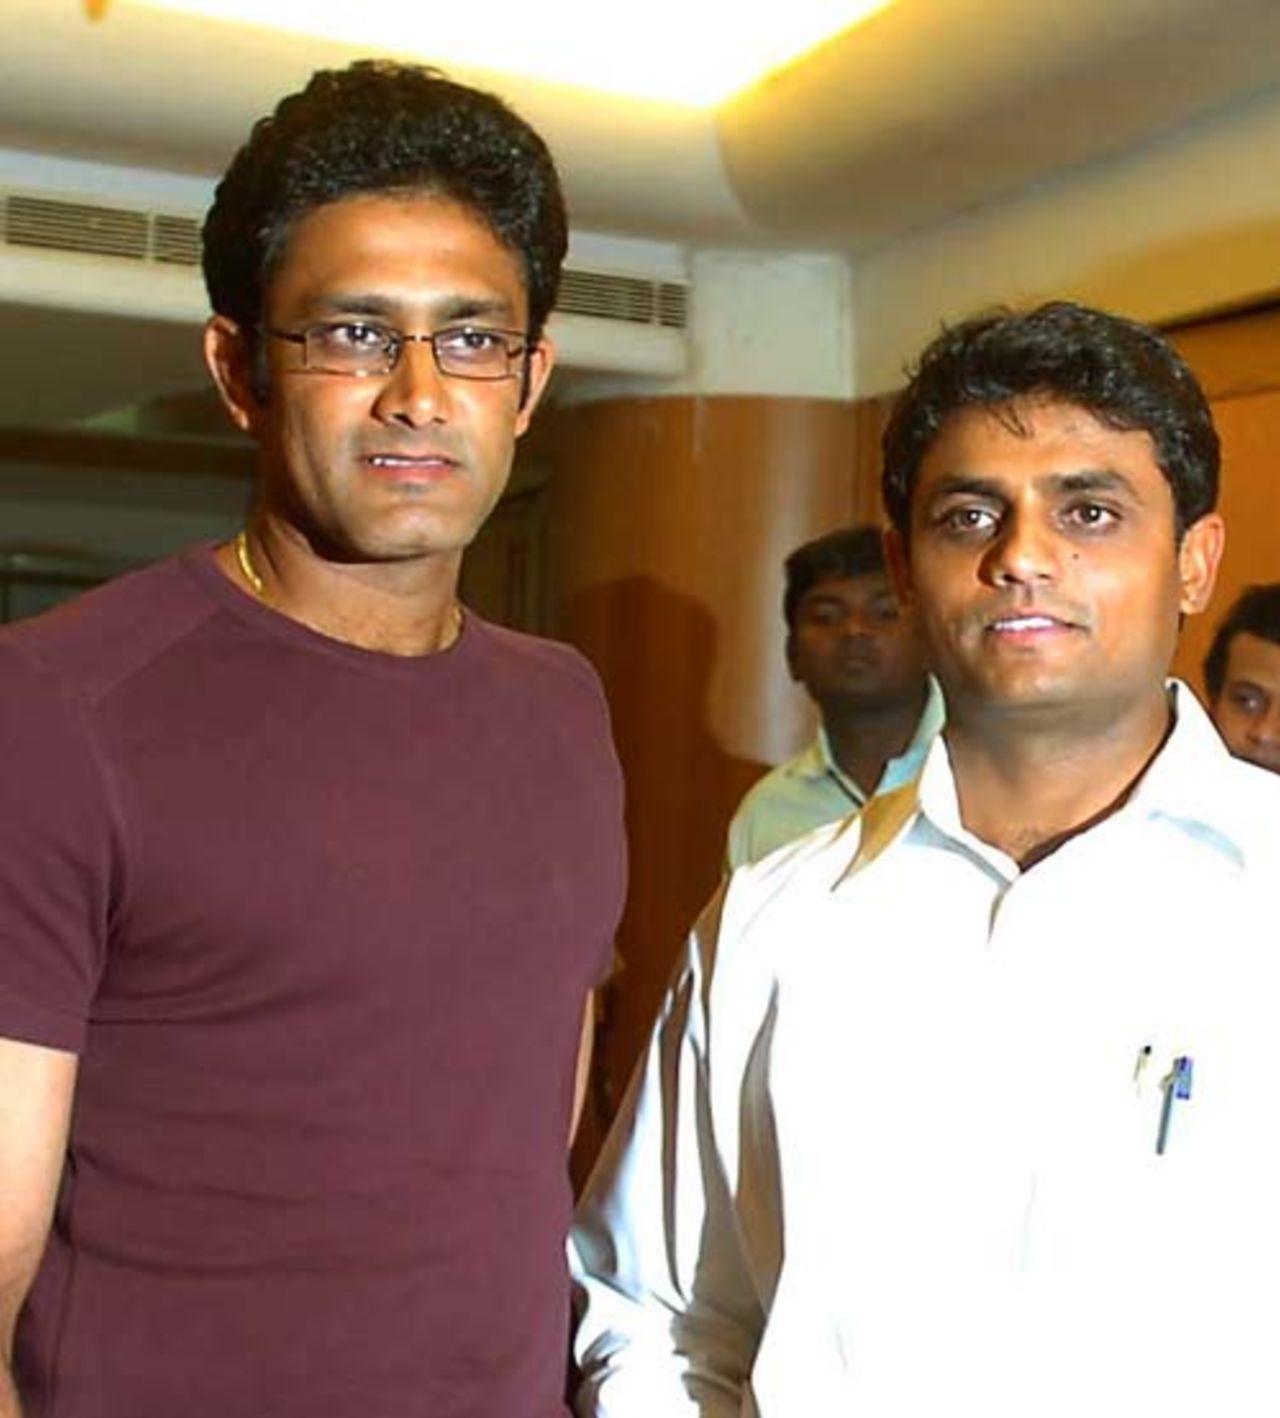 Sujith Somasunder announces his retirement with his former colleague Anil Kumble, Bangalore, February 21, 2007